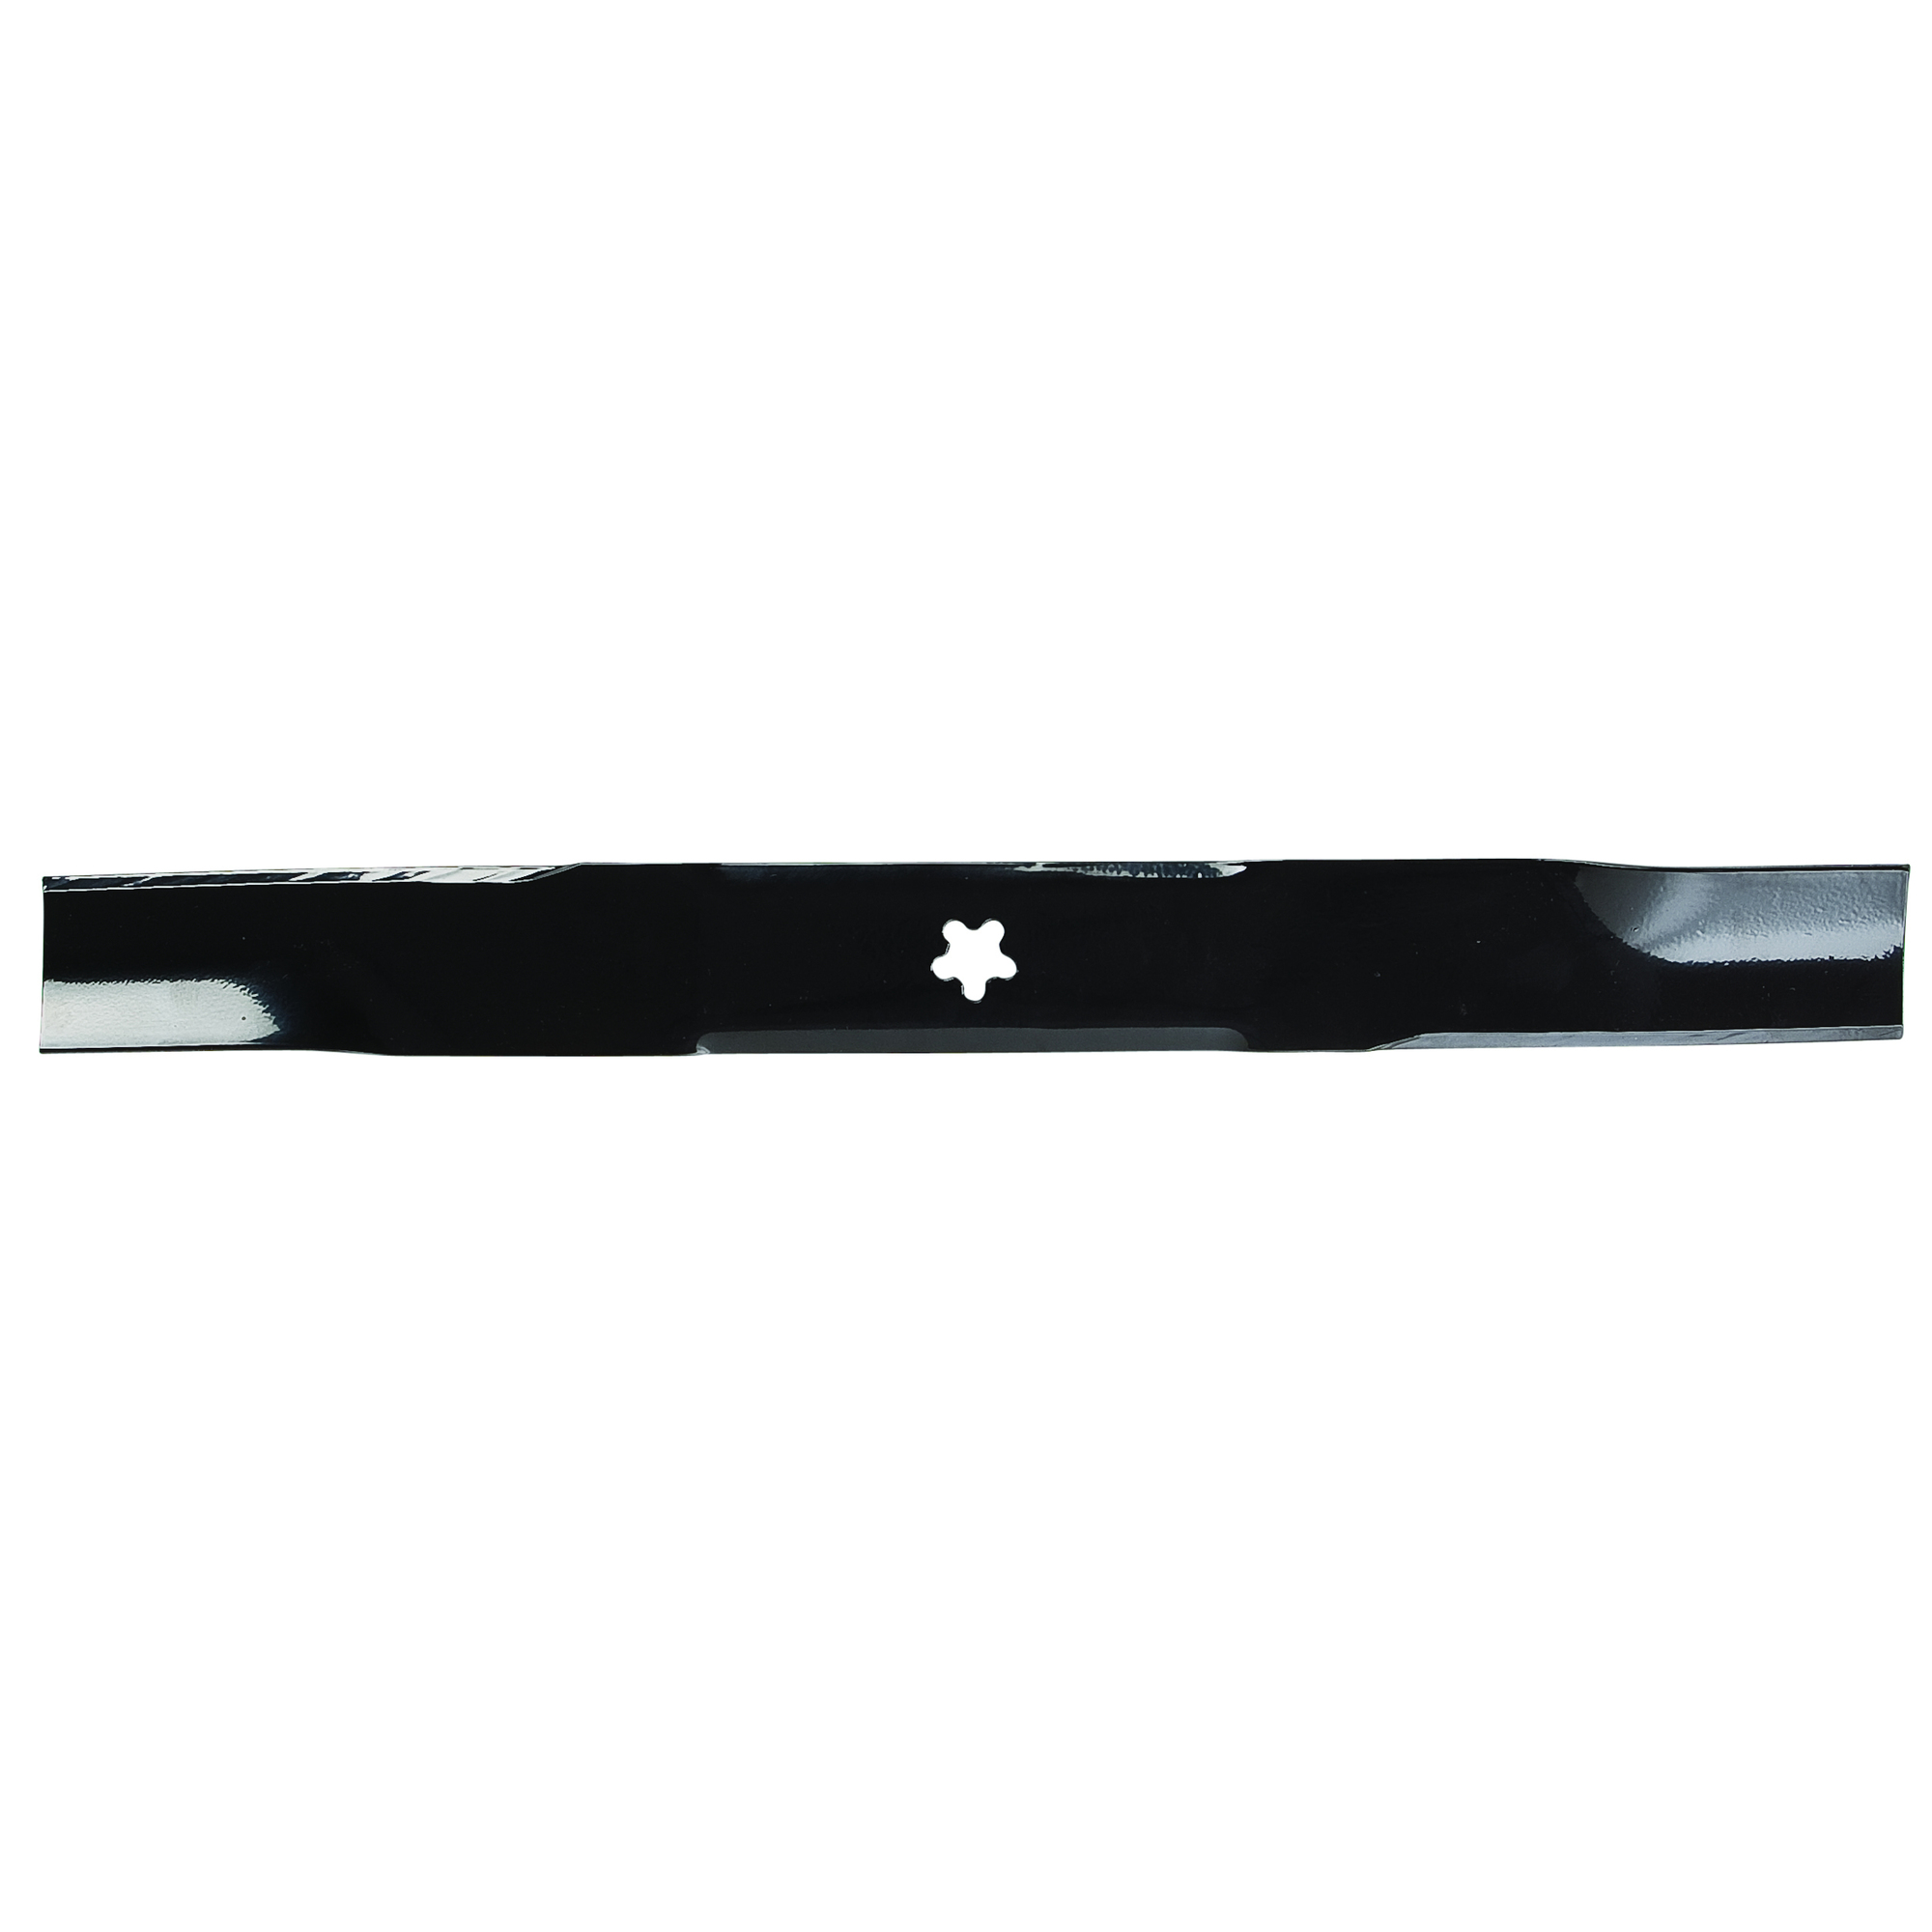 Oregon, Replacement Lawn Mower Blade, Length 18 in, Model 195-085